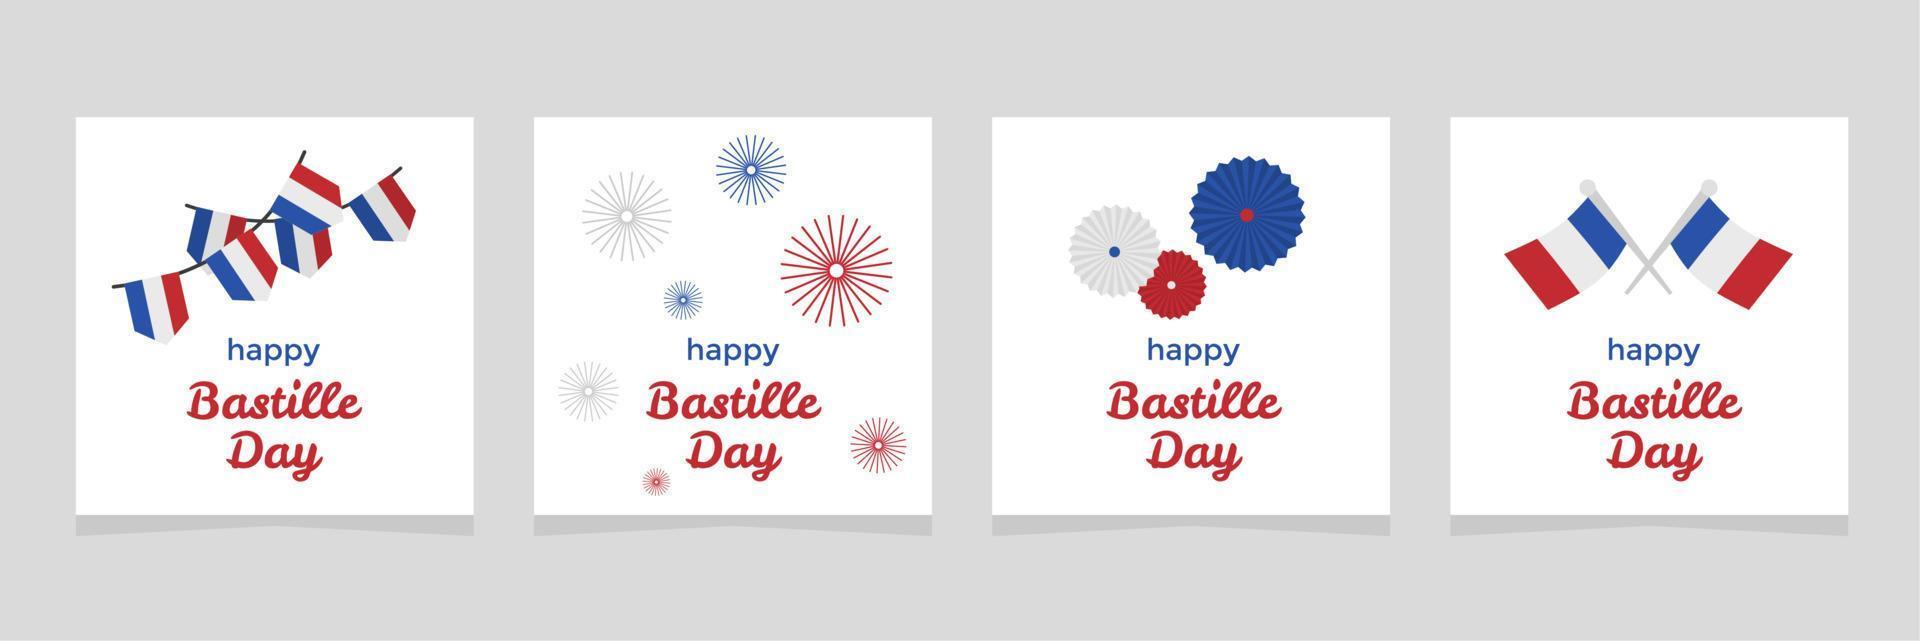 set of simple bastille day posters for social media posts, greeting cards, marketing, promotions, and more vector